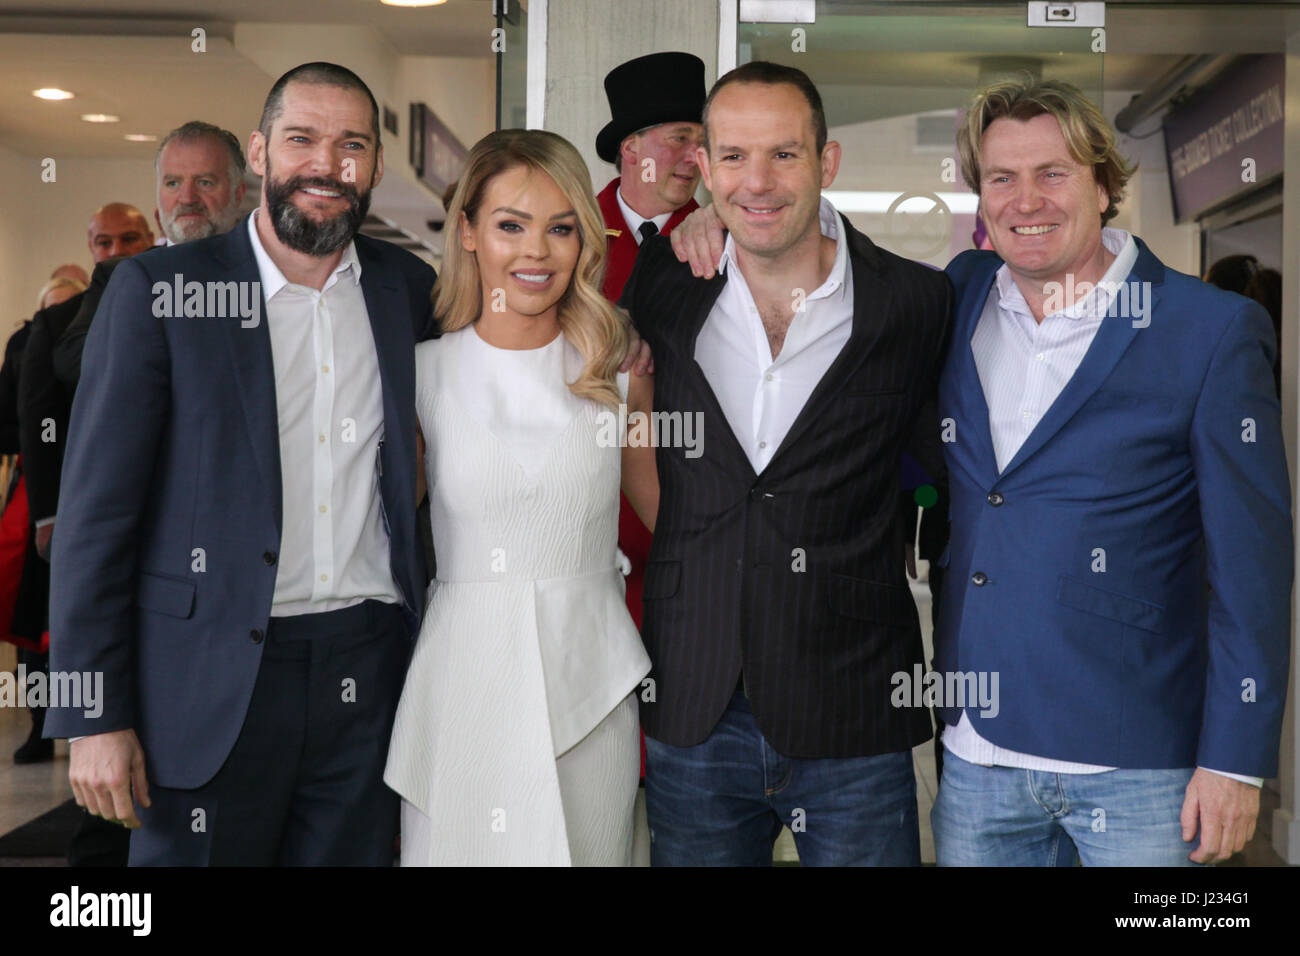 Katie Piper, Fred Sirieix and Martin Lewis officially open the Ideal Home Show sponsored by Zoopla at Olympia London.    Celebrities take part in the launch the Ideal Home Show. The annual Britain's biggest consumer home event sponsored by Zoopla, dating back to 1908, when it was first launched at Olympia. The UK's most famous home show will be welcoming visitors from 24 March - 9 April.  Featuring: Fred Sirieix, Katie Piper, Martin Lewis, David Domoney Where: London, United Kingdom When: 24 Mar 2017 Credit: Dinendra Haria/WENN.com Stock Photo